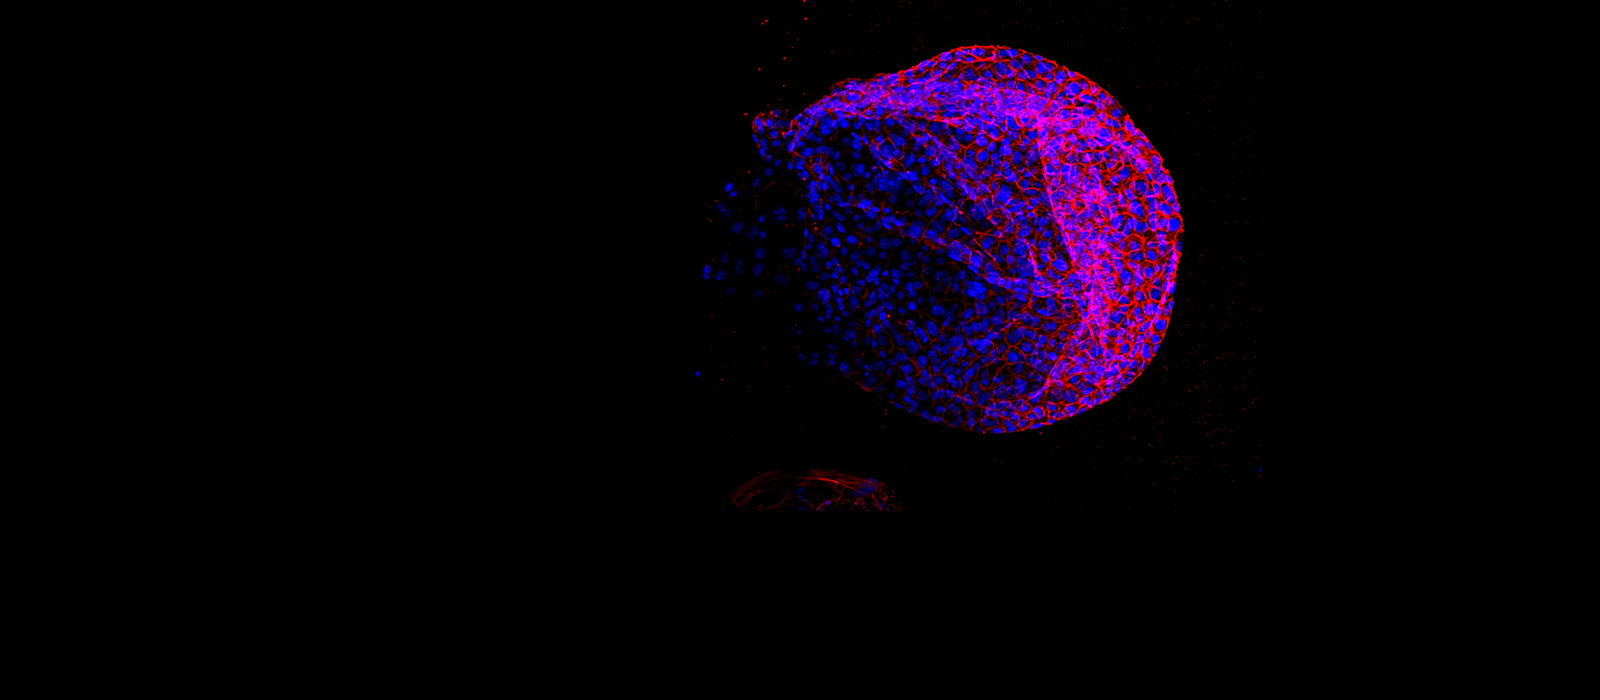 Cells derived from KRAS mutated model. © Oxford University Department of Oncology